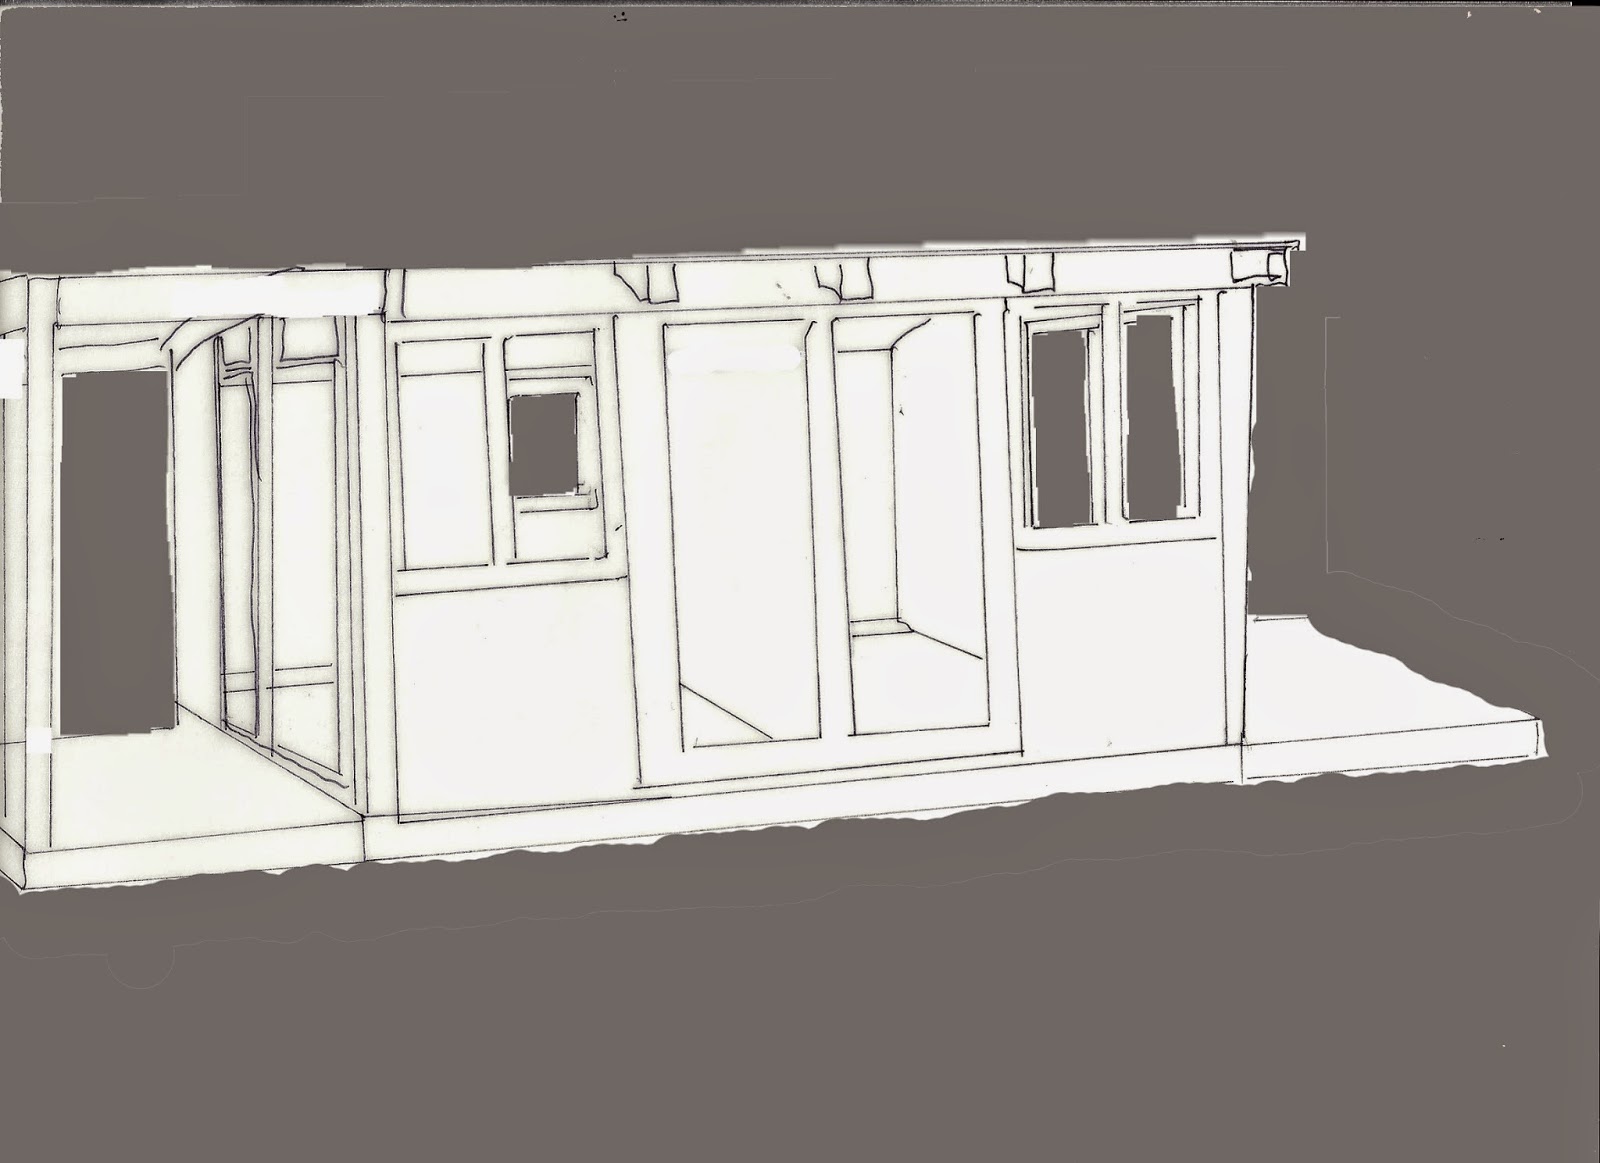 Outline of a shed split down the middle ,with two long windows and two short windows on the front and a deck on each side. The background is coloured grey to show placement of windows and doors at the side and rear.